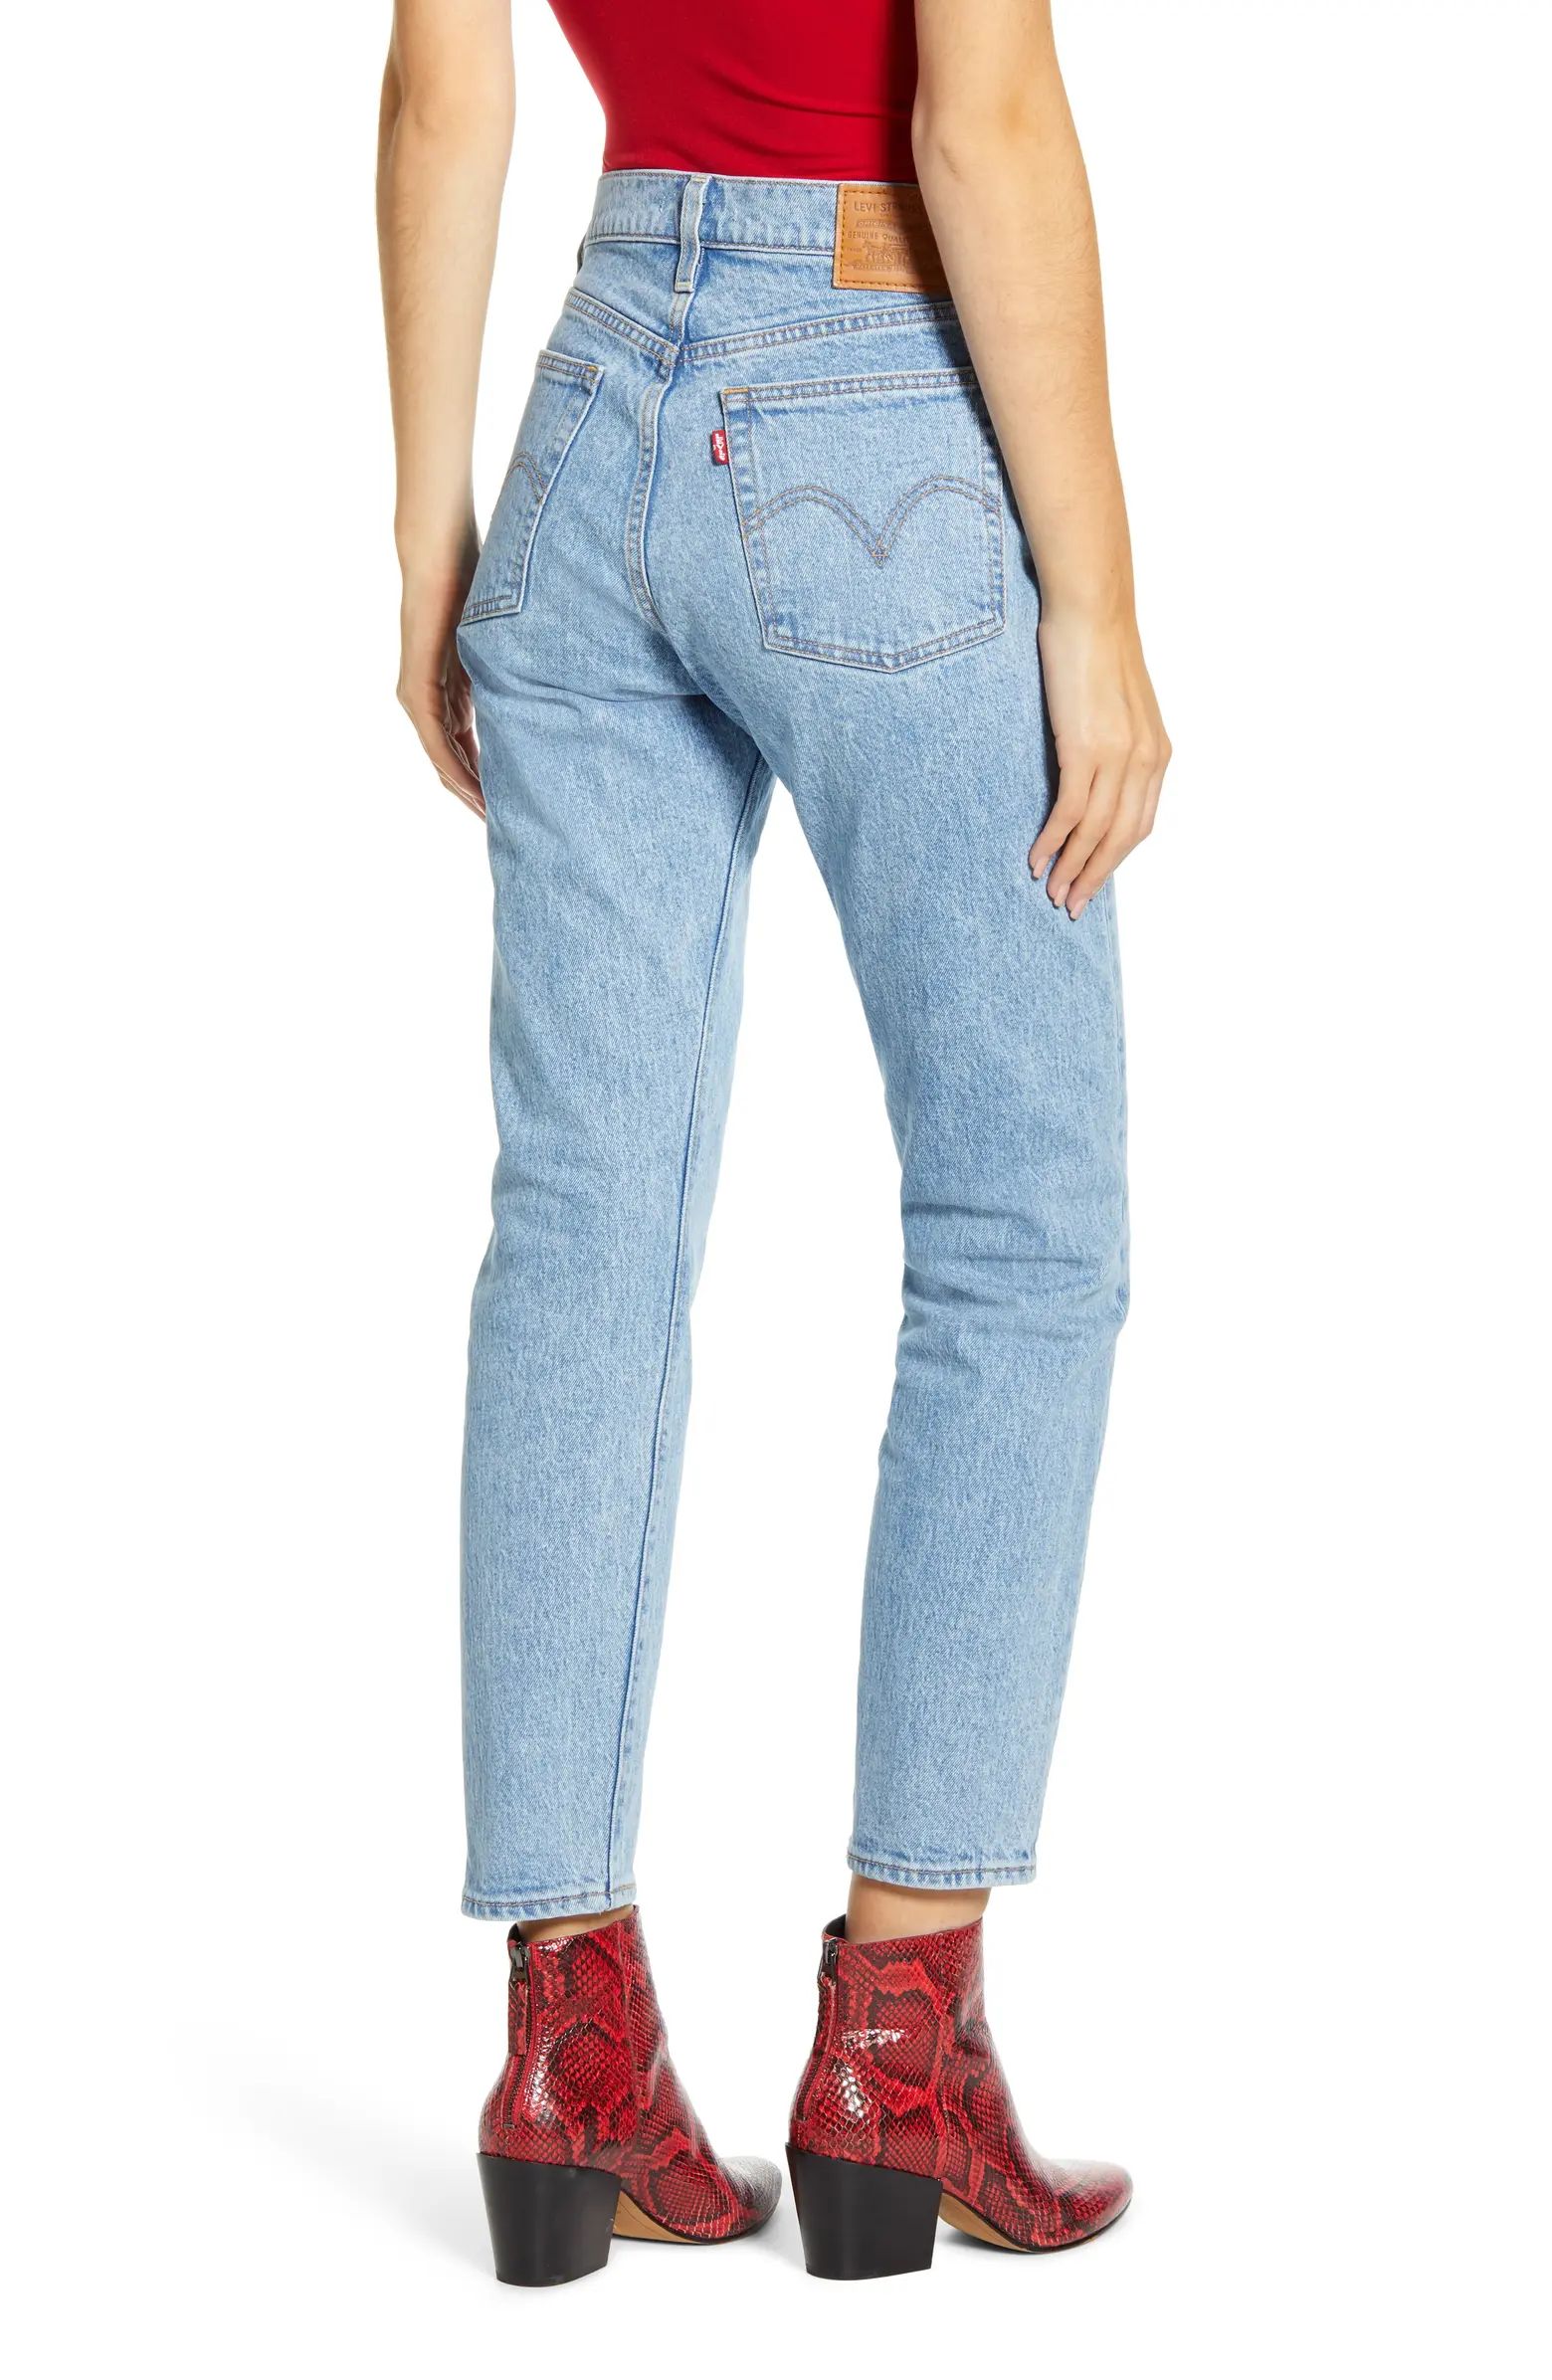 Wedgie Icon Fit High Waist Jeans | Nordstrom